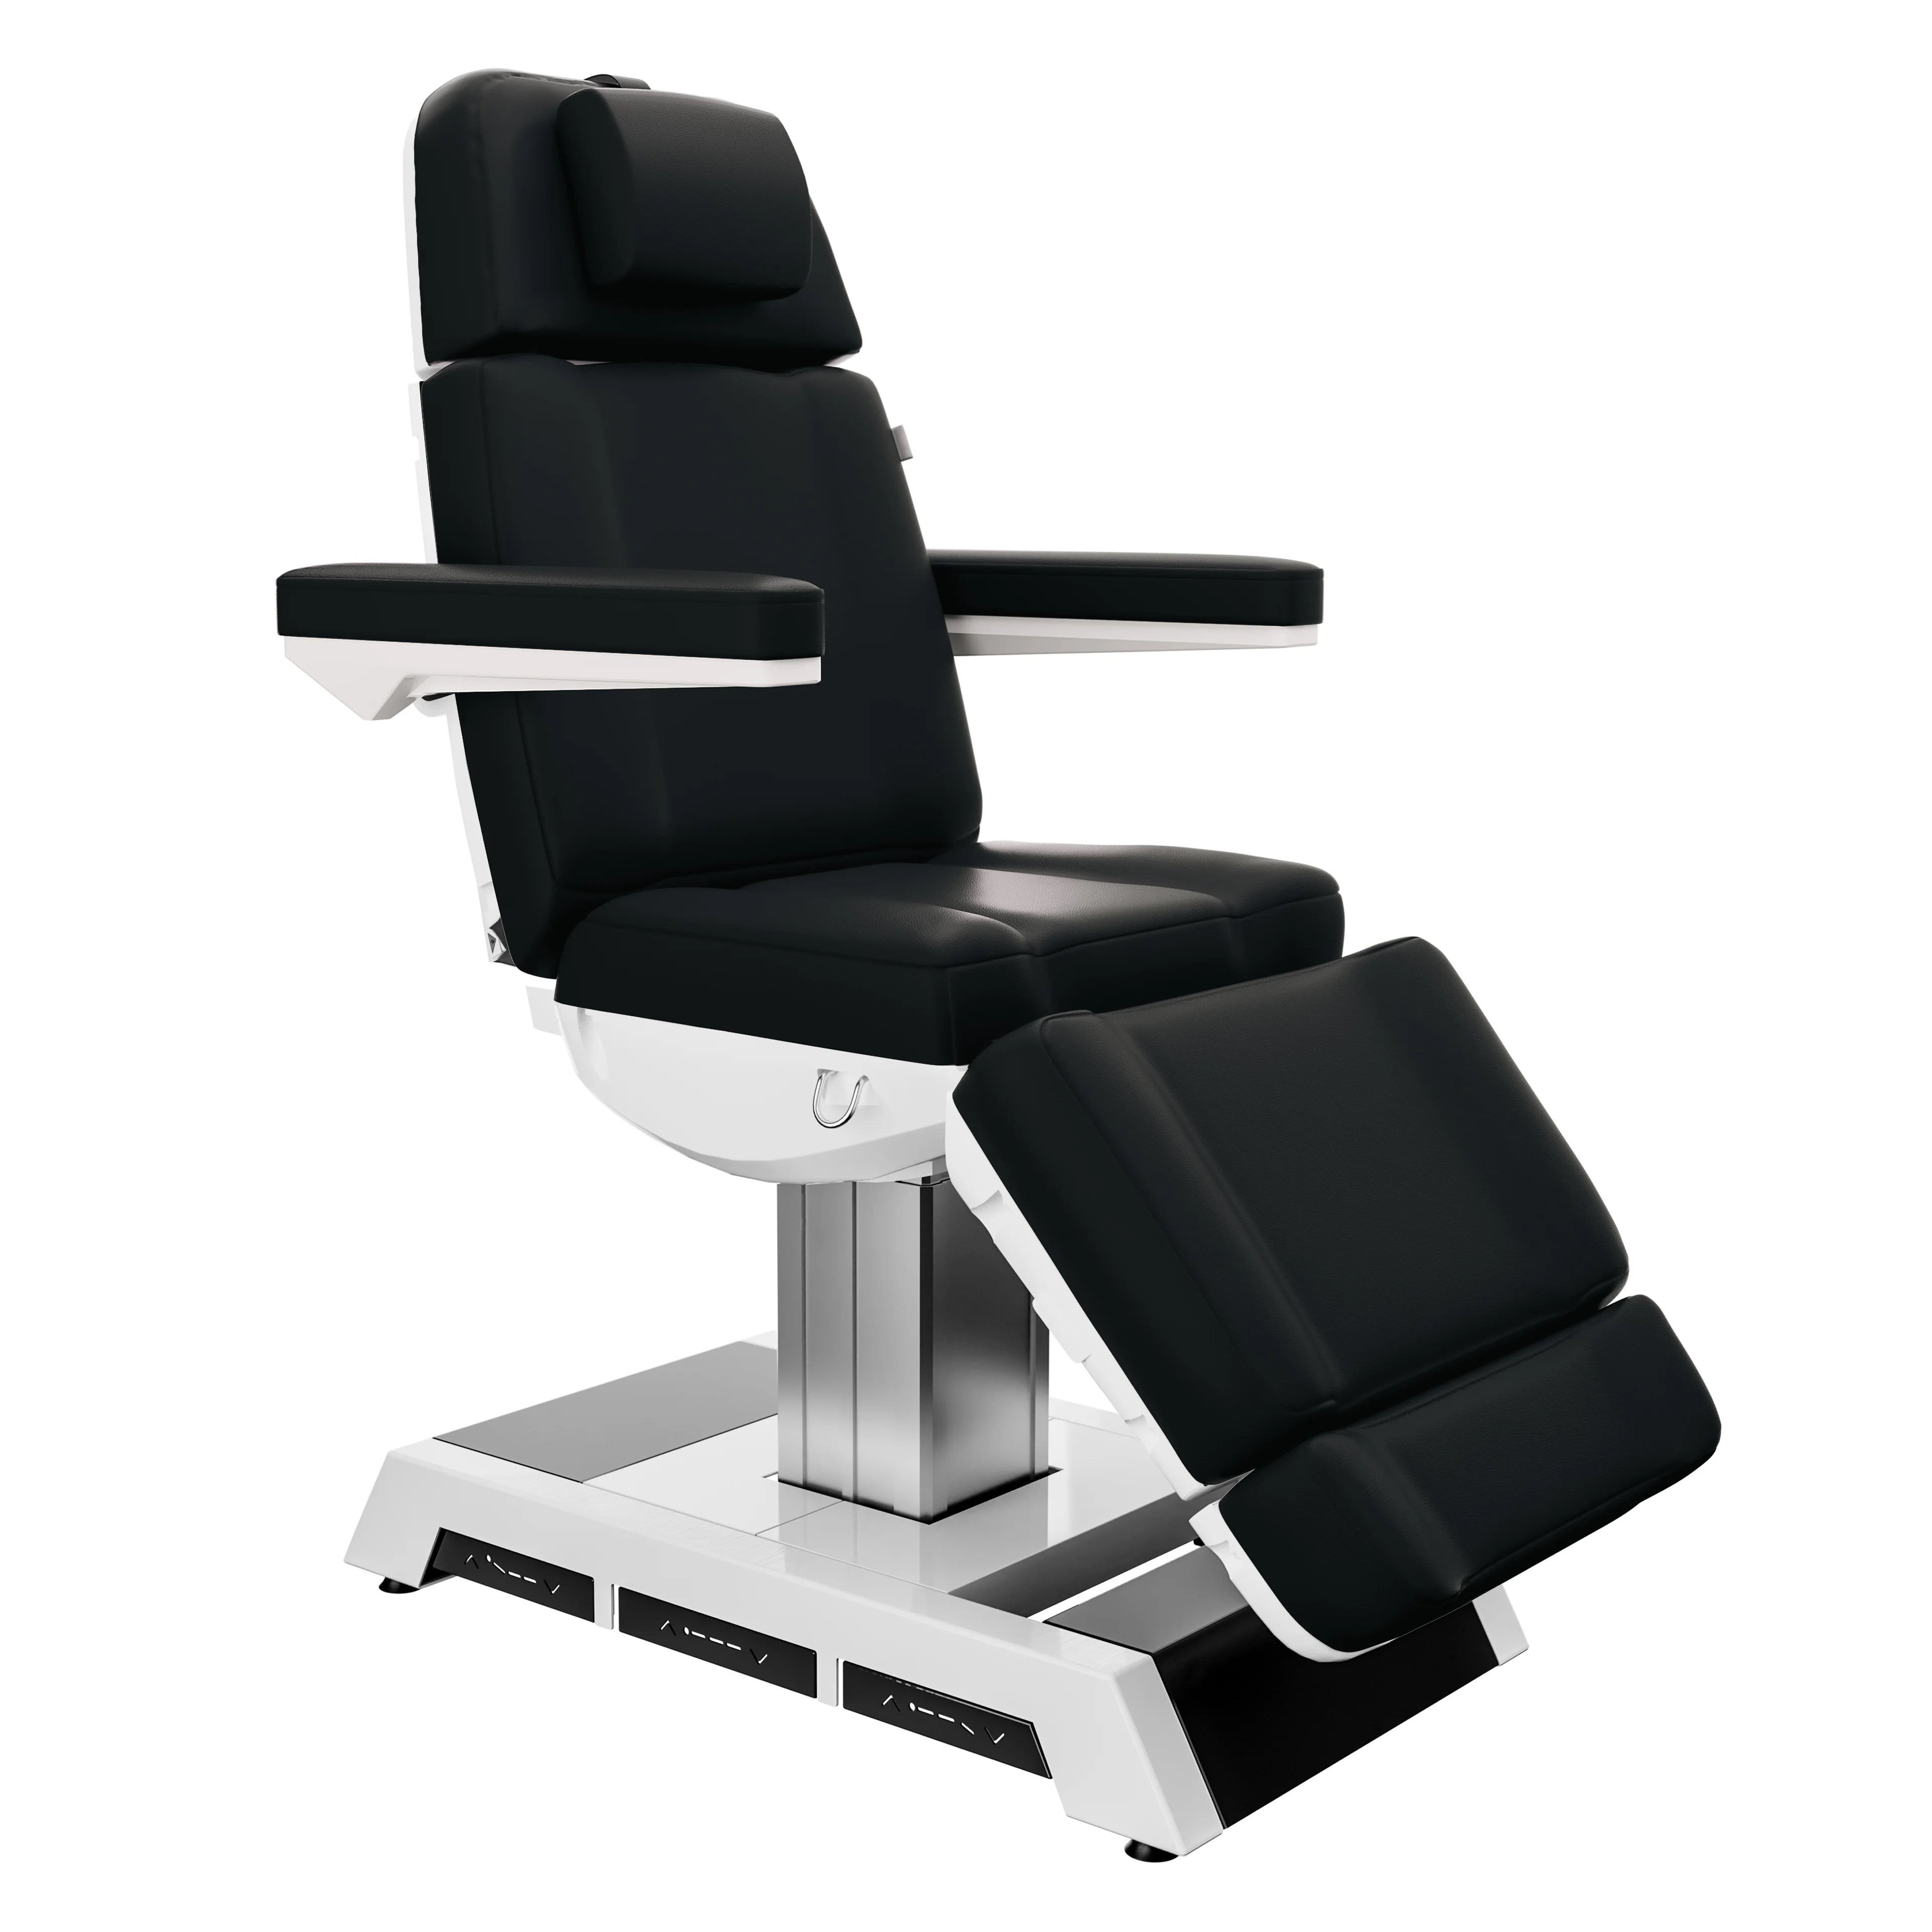 SpaMarc . Adones (Black) . 4 Motor Spa Treatment Chair/Bed